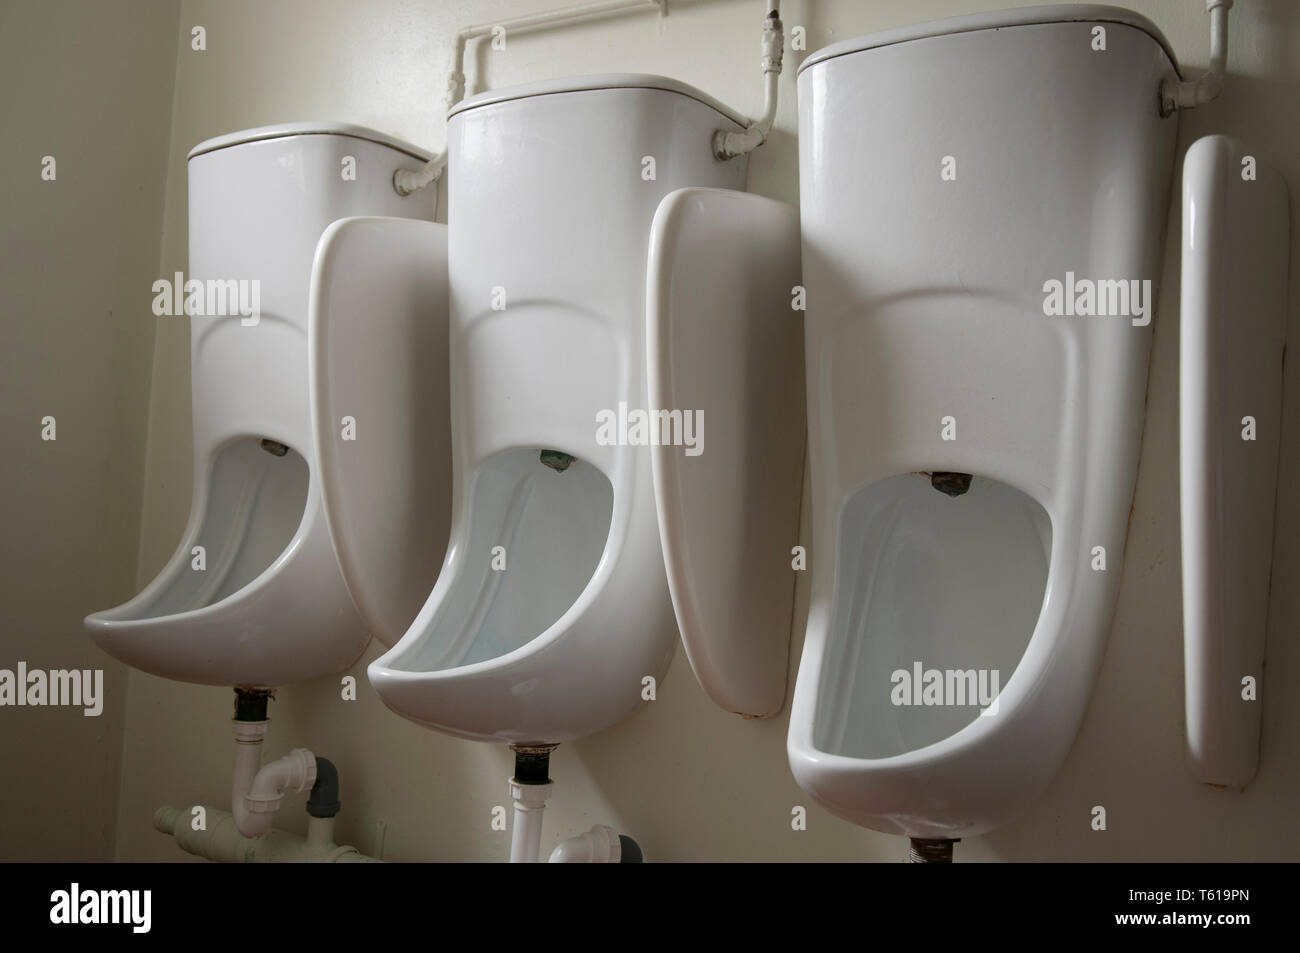 Urinals in an office building. Stock Photo